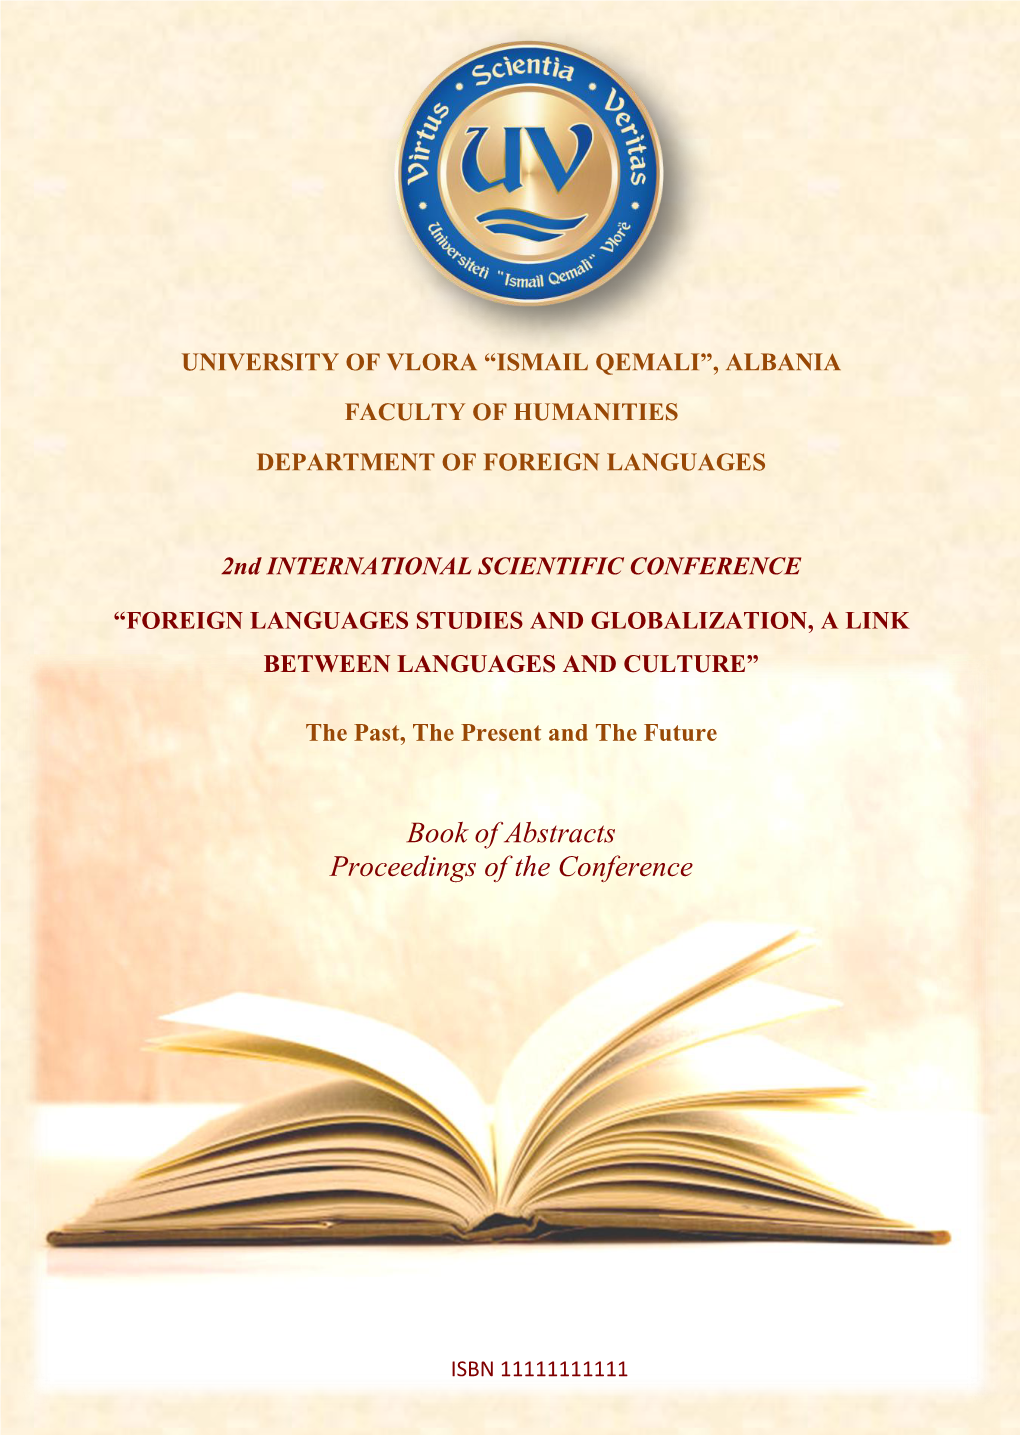 2Nd INTERNATIONAL SCIENTIFIC CONFERENCE